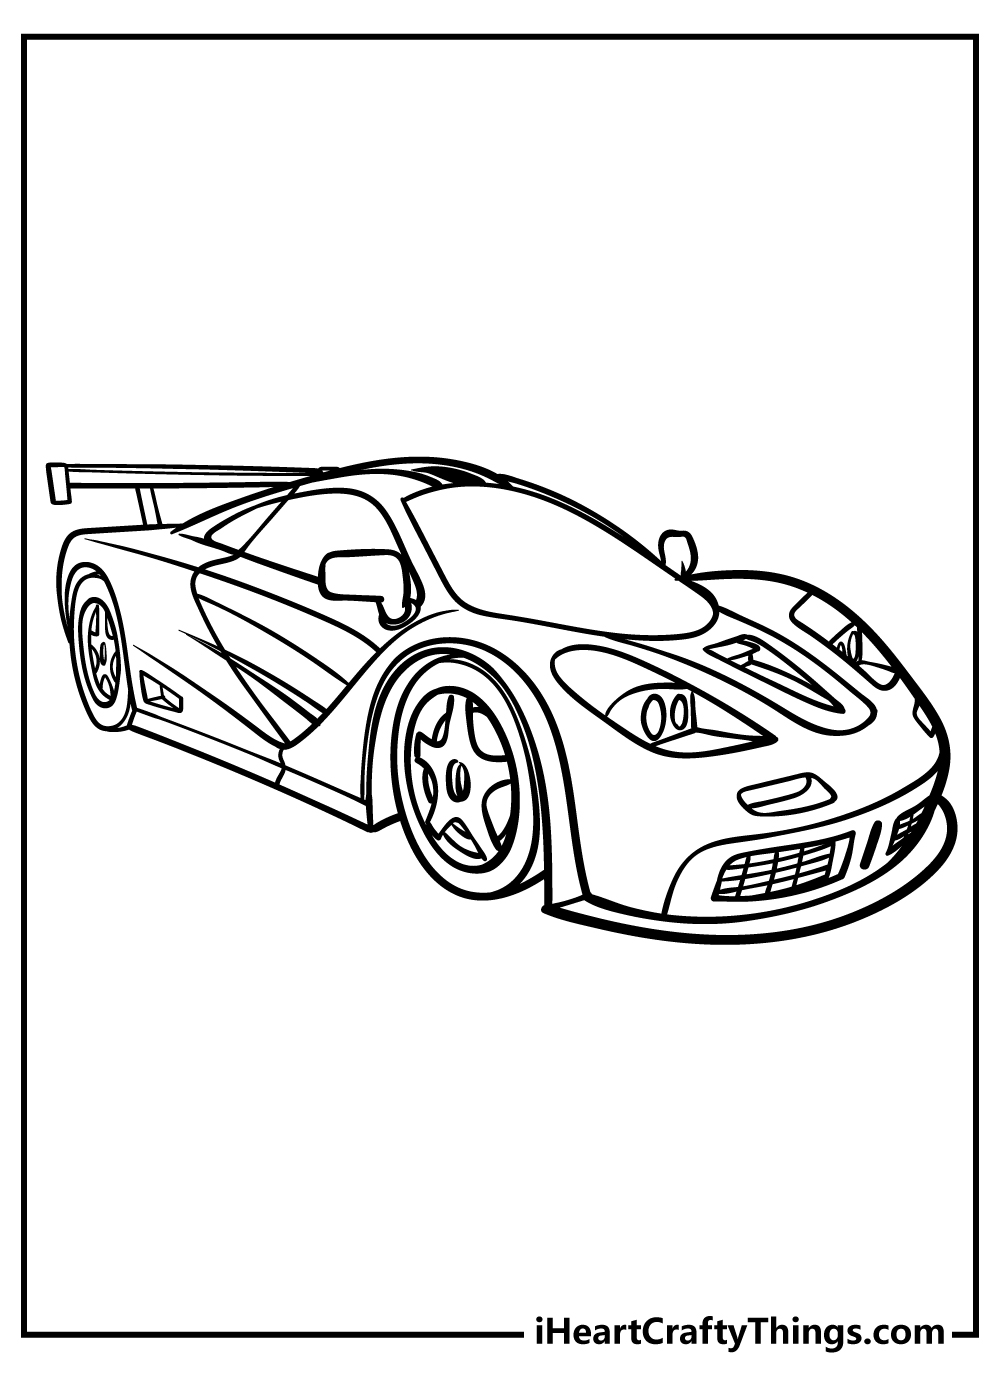 Race Car Easy Coloring Pages